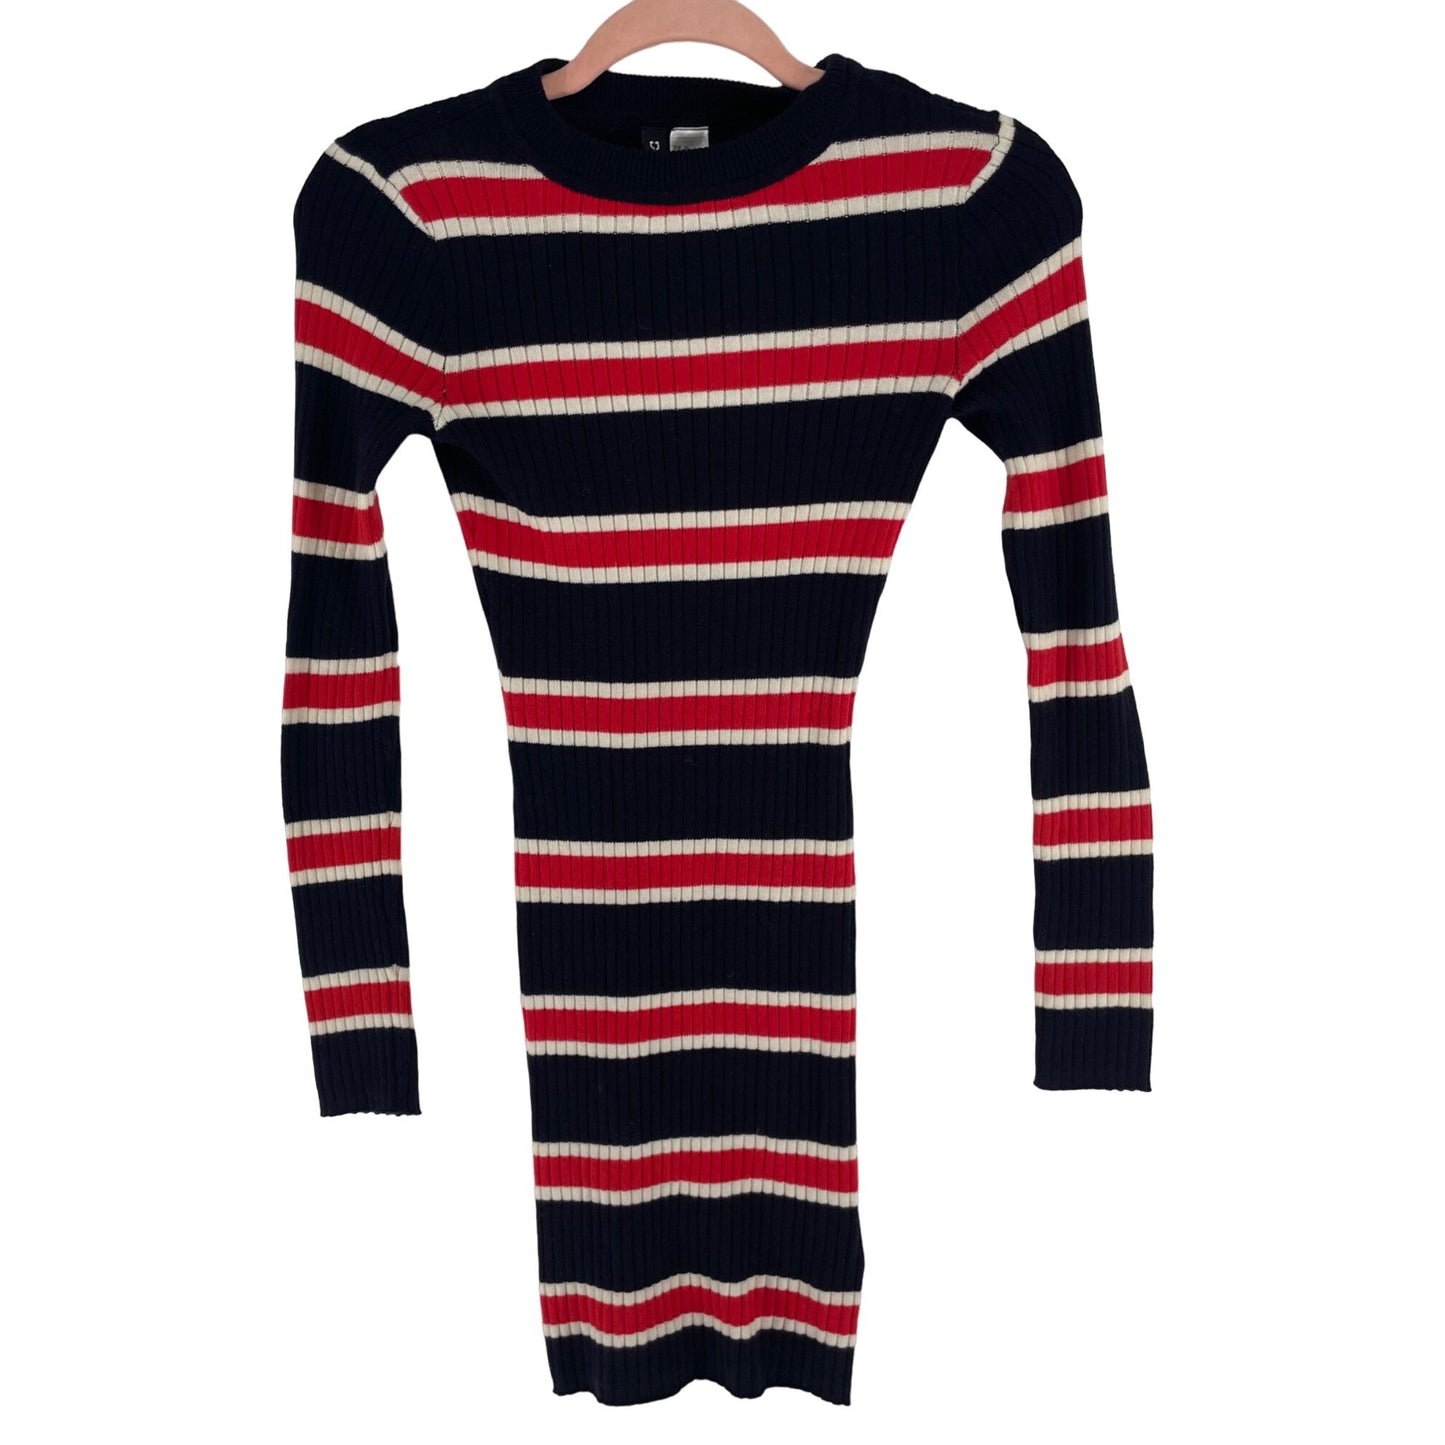 H&M Women's Size 0 Navy/Red/Cream Striped Long-Sleeved Ribbed Bodycon Dress